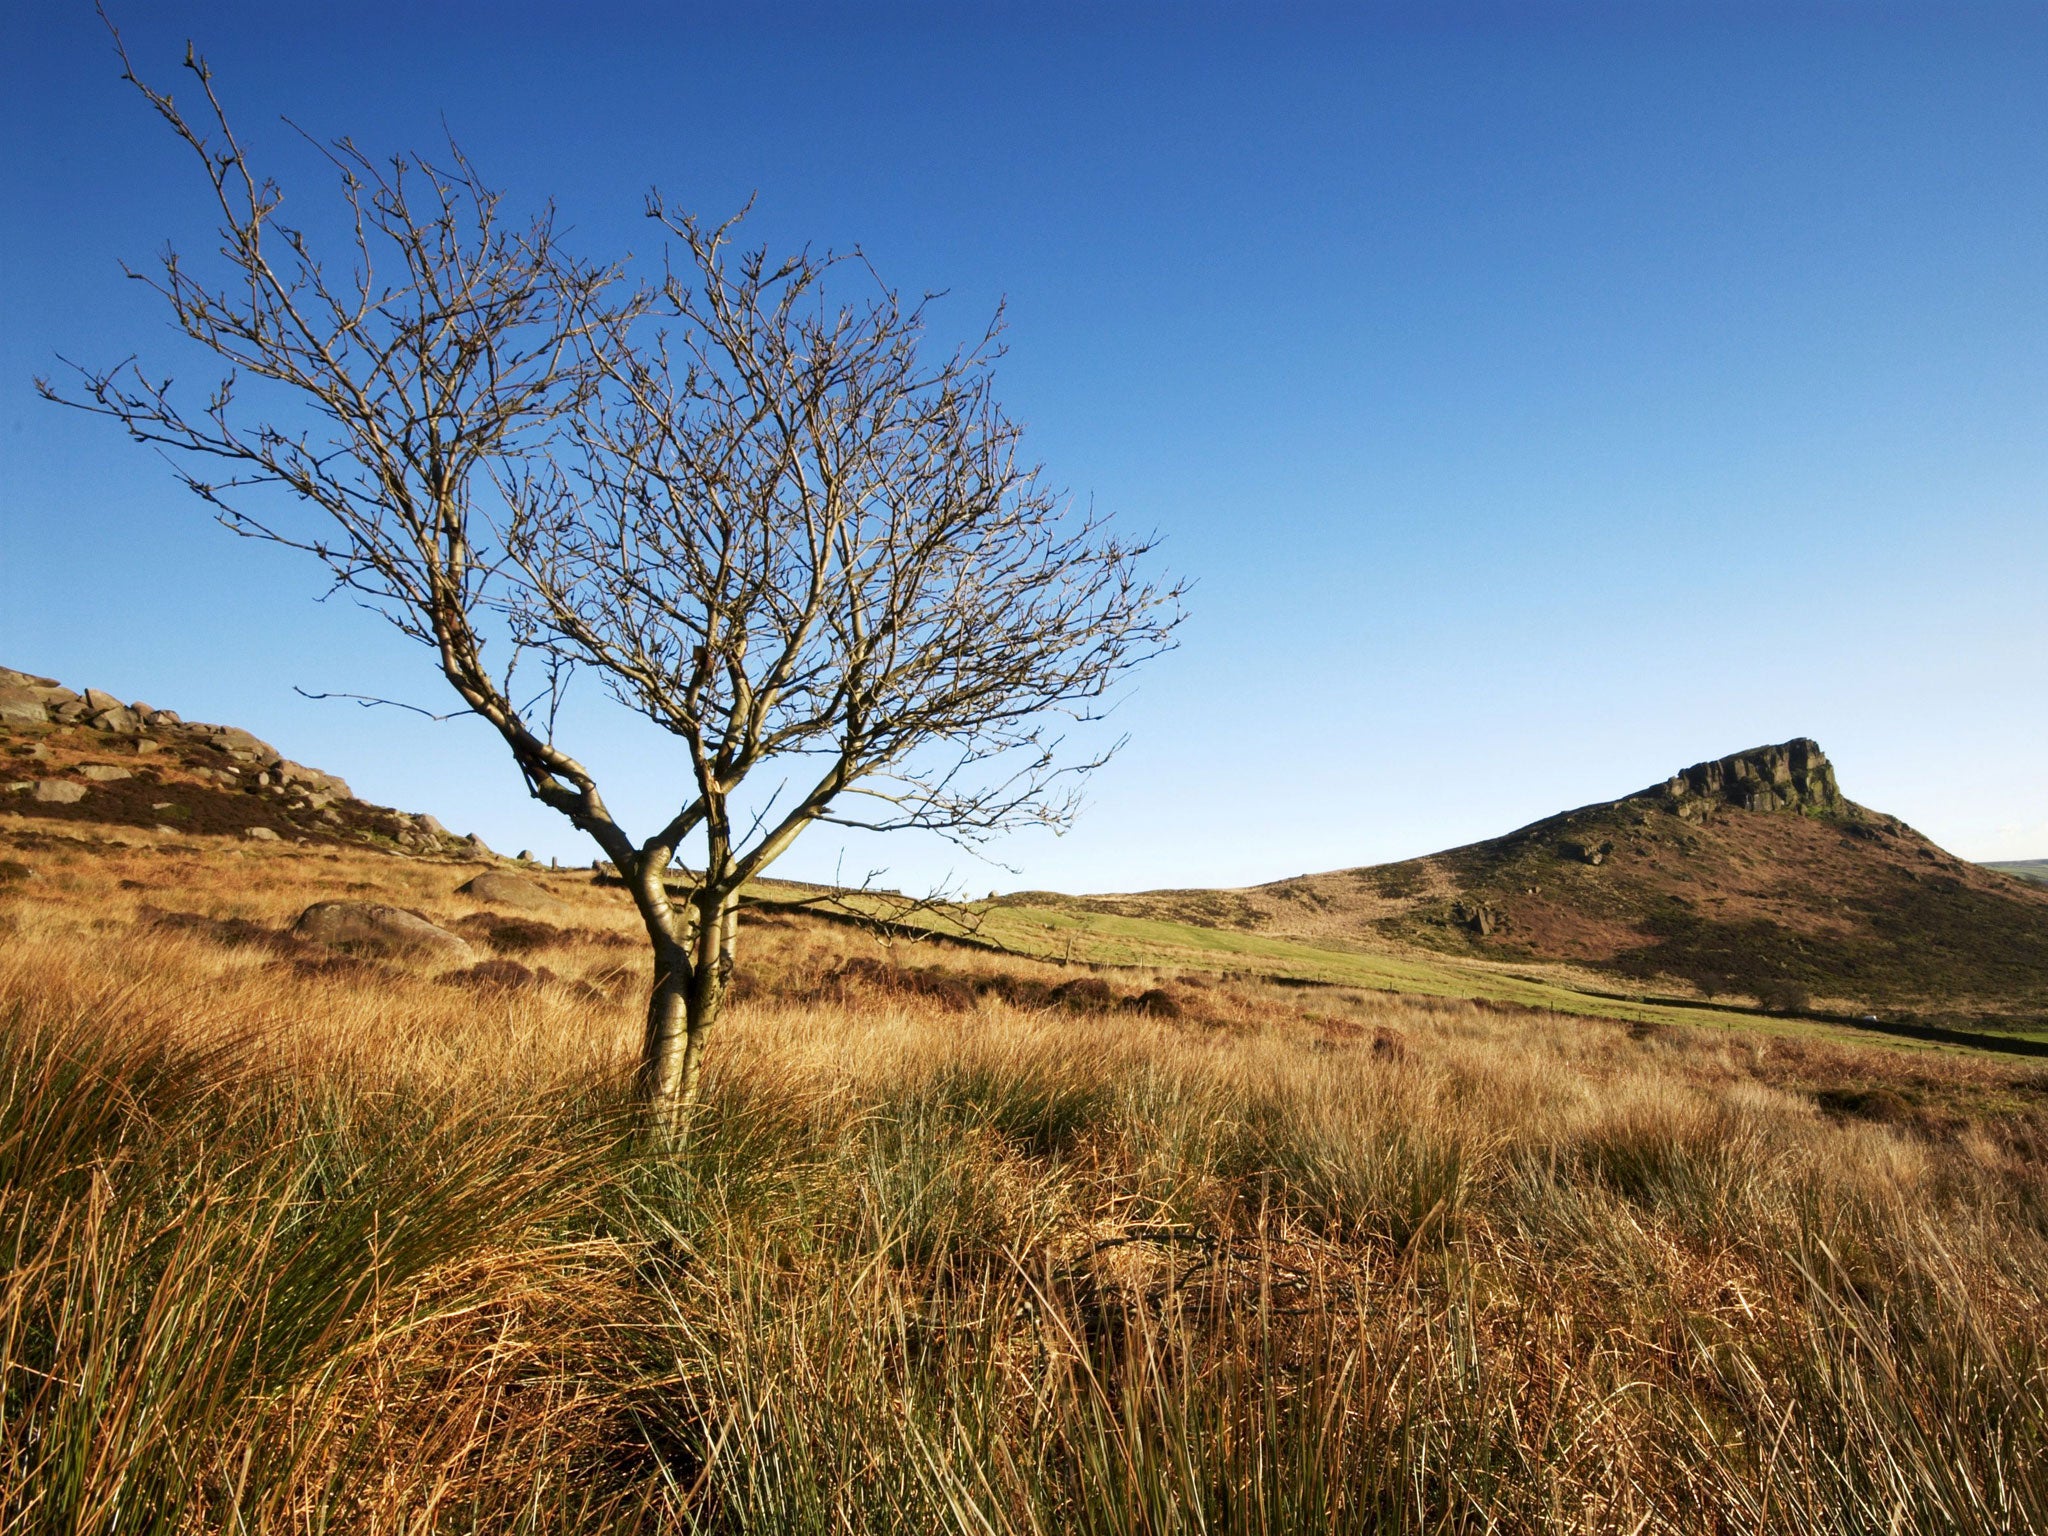 The beauty of the Peak District is among the areas in greatest peril of development